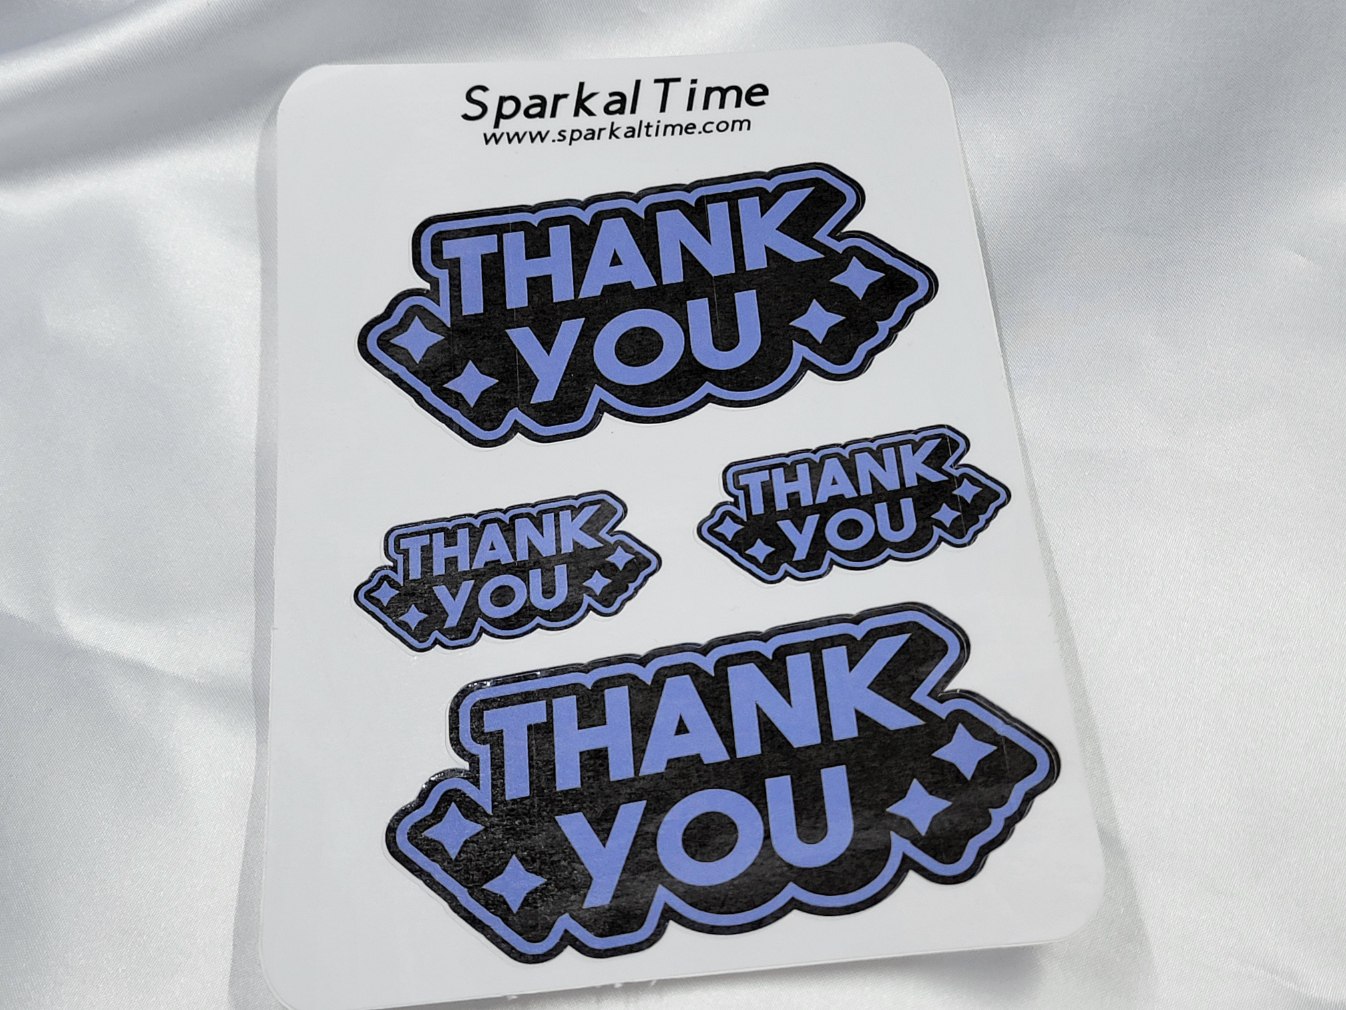 Thank You Stickers